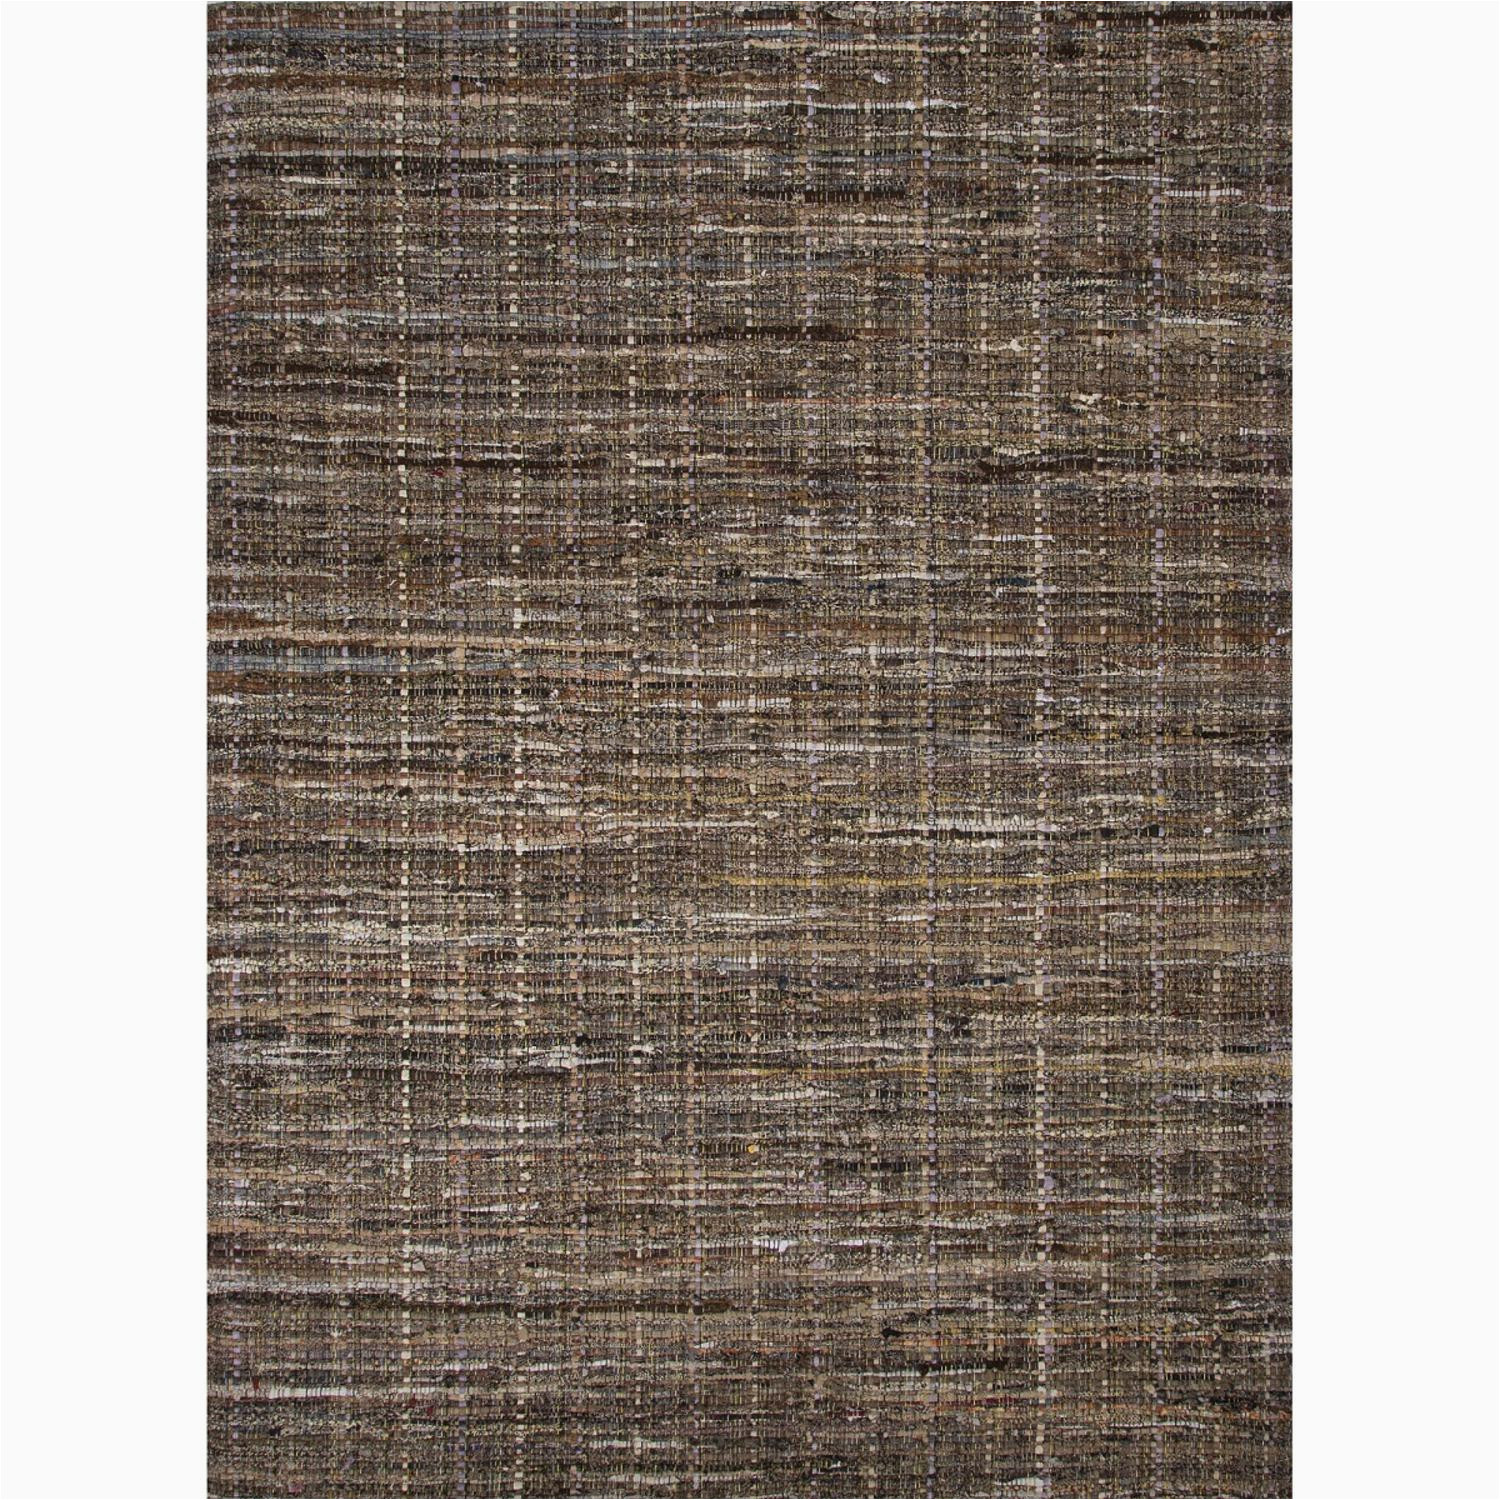 Chocolate Brown area Rugs 8×10 8 X 10 Chocolate Brown and toffee Flat Weave Harris Hand